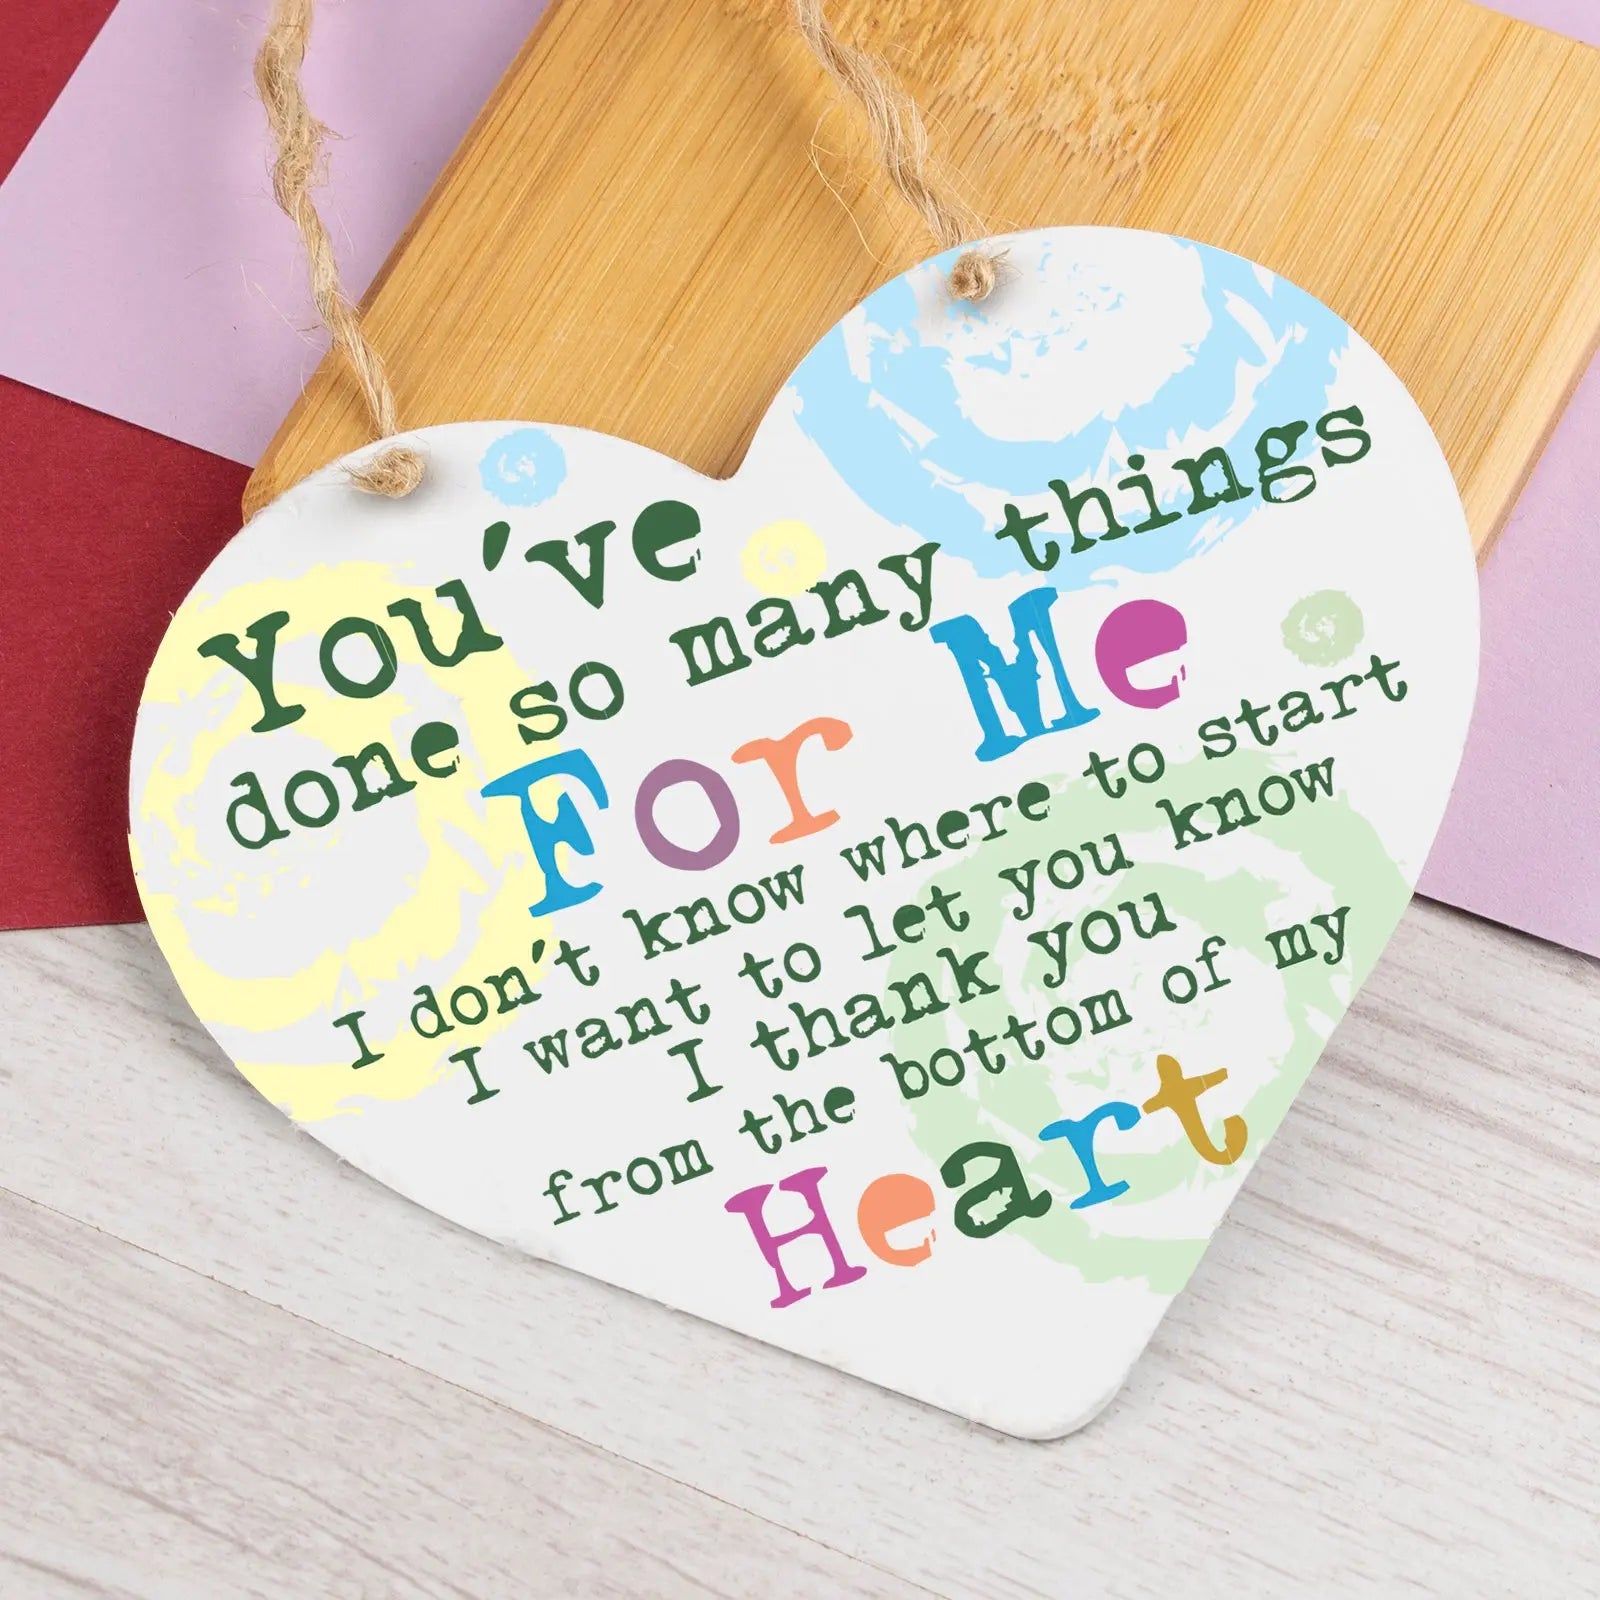 Special Thank You Friend Gift Heart Hanging Sign Teacher Gifts Friendship